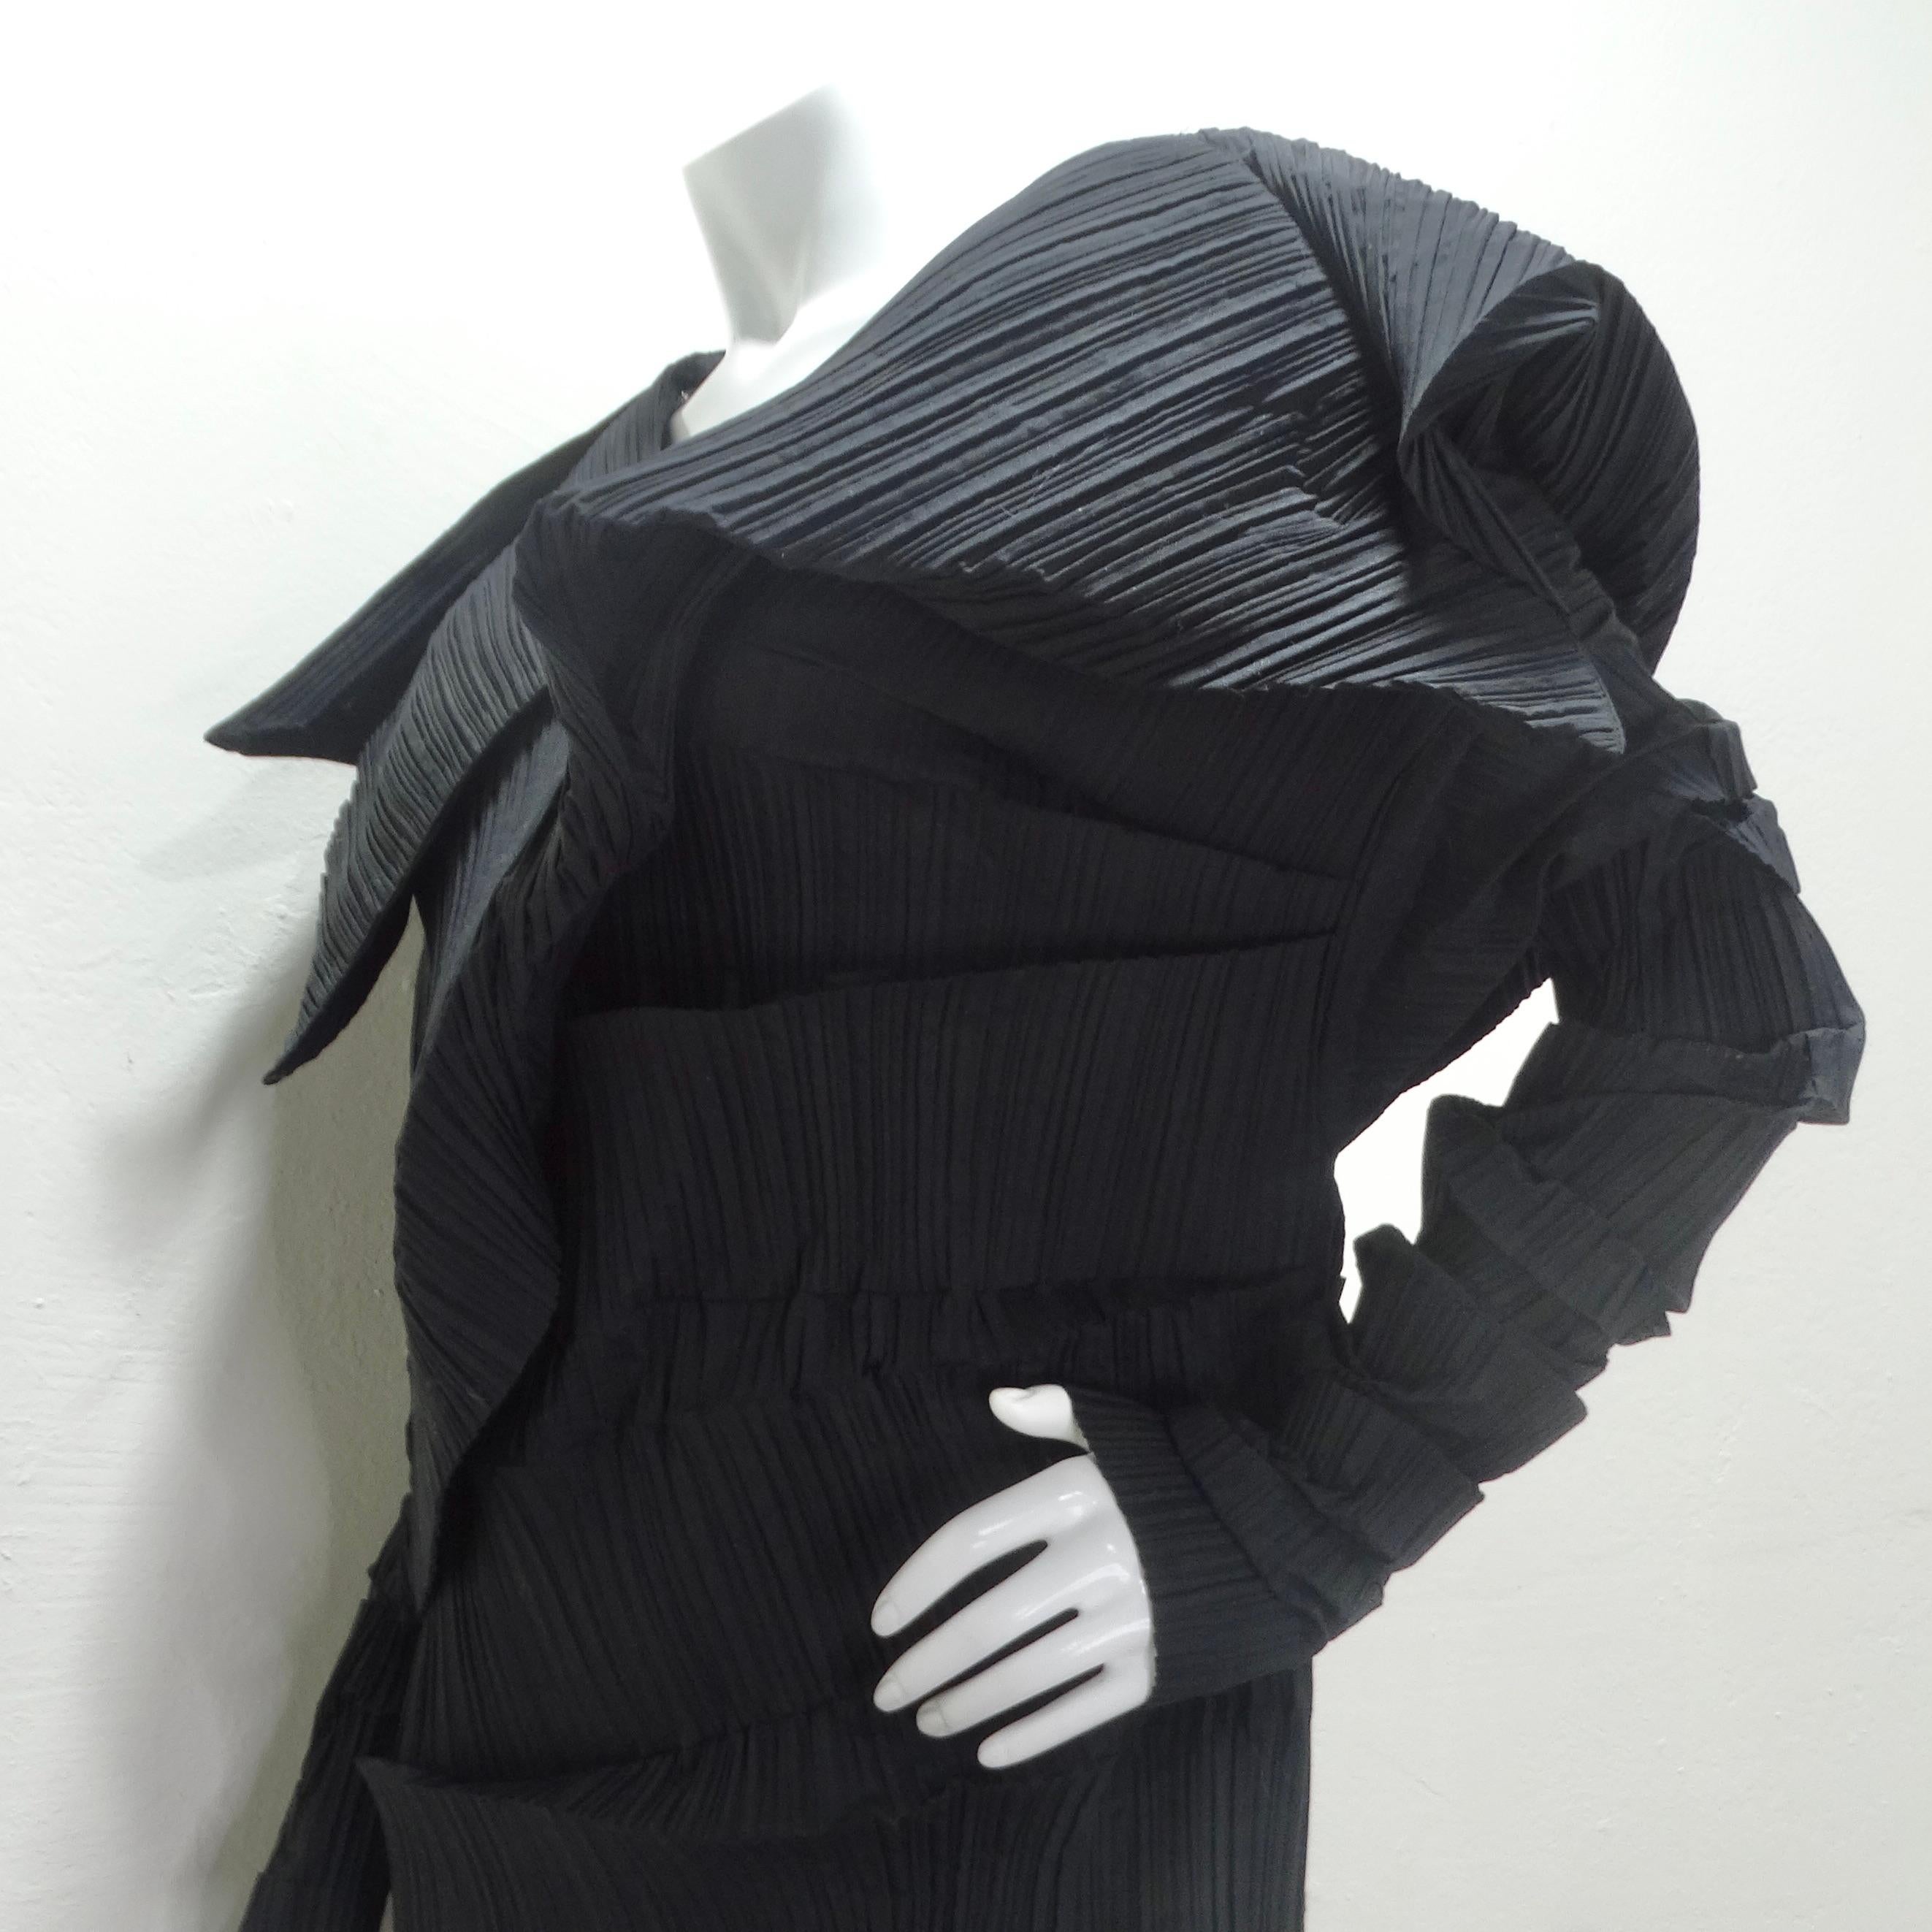 Issey Miyake 1989 Reverse Pleats Black Sculptural Museum Quality Dress For Sale 5